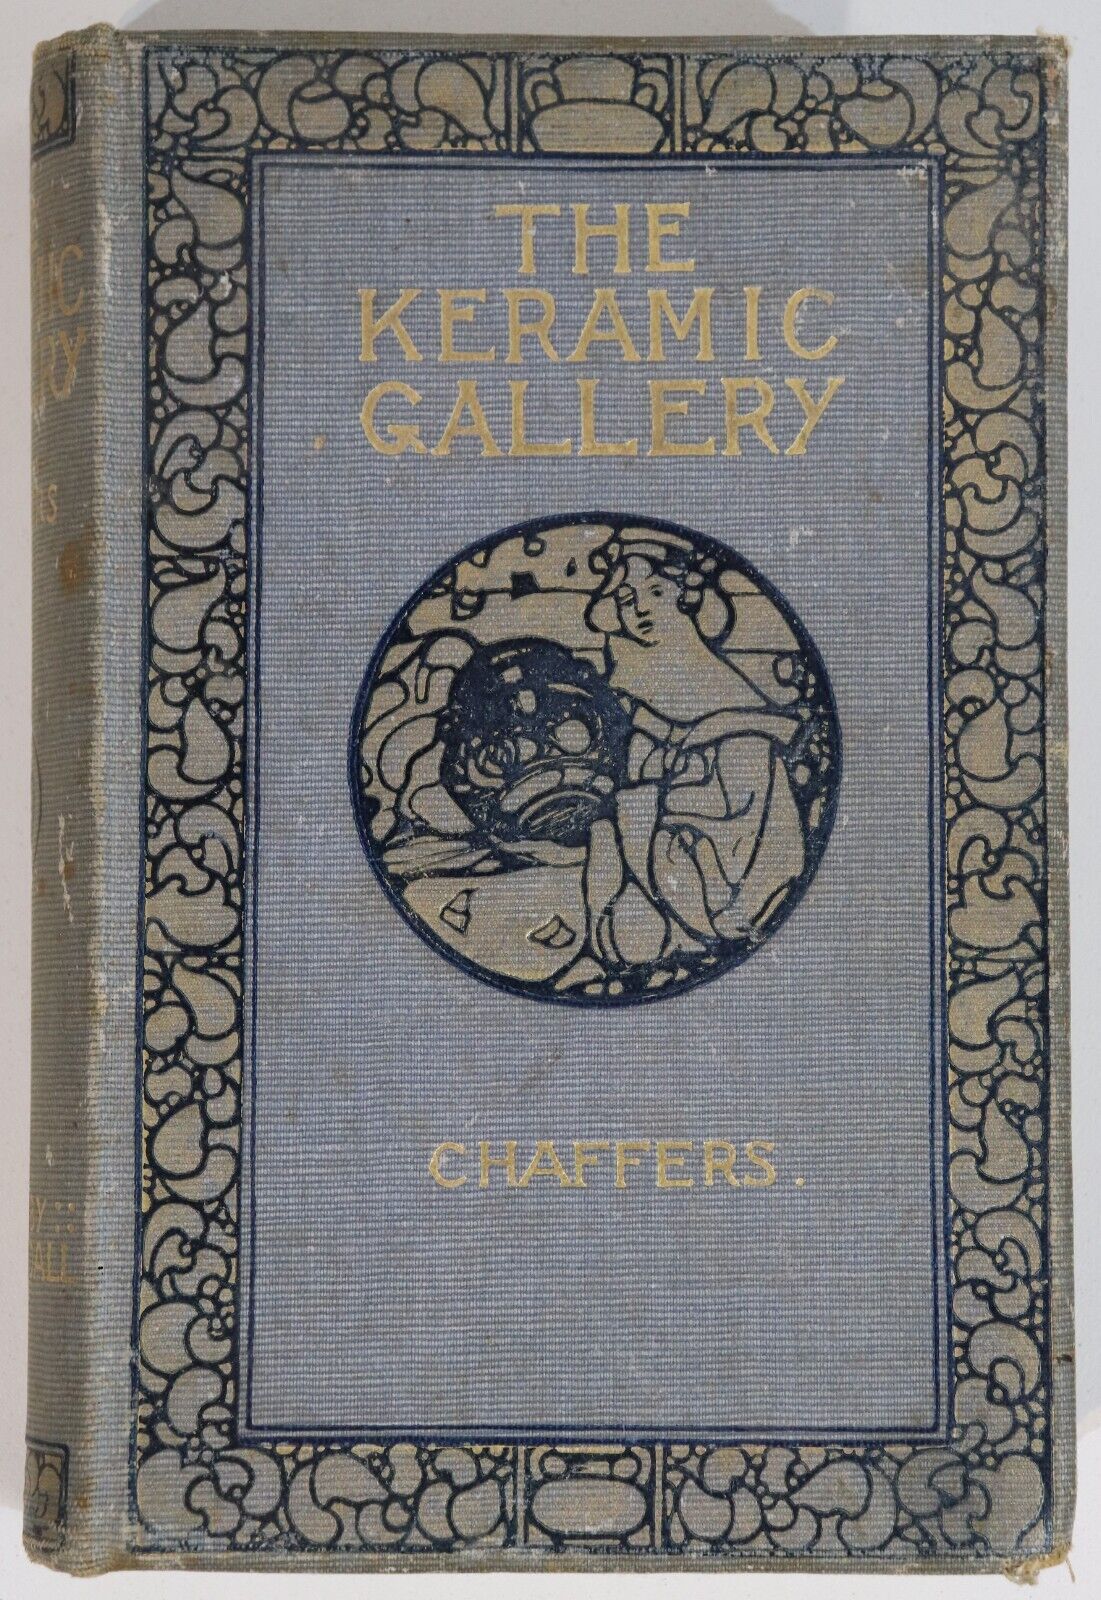 The Keramic Gallery by W. Chaffers - 1907 - Antique & Collectible Reference Book